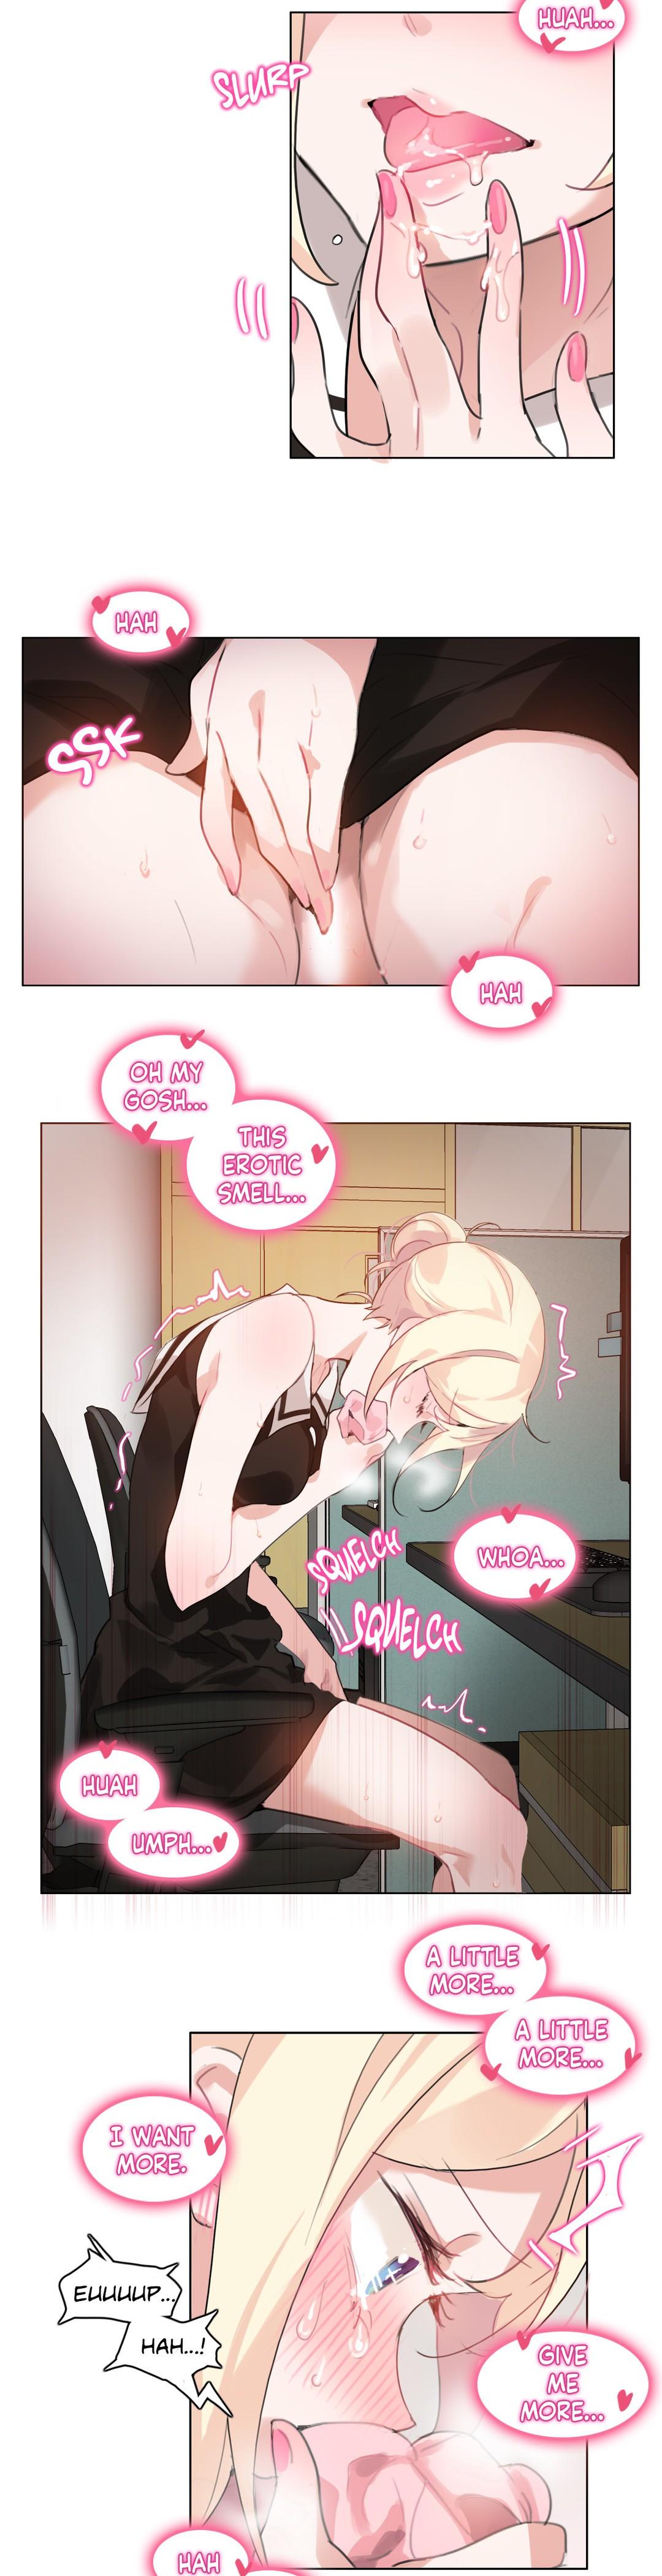 A Pervert's Daily Life Ch. 1-34 286